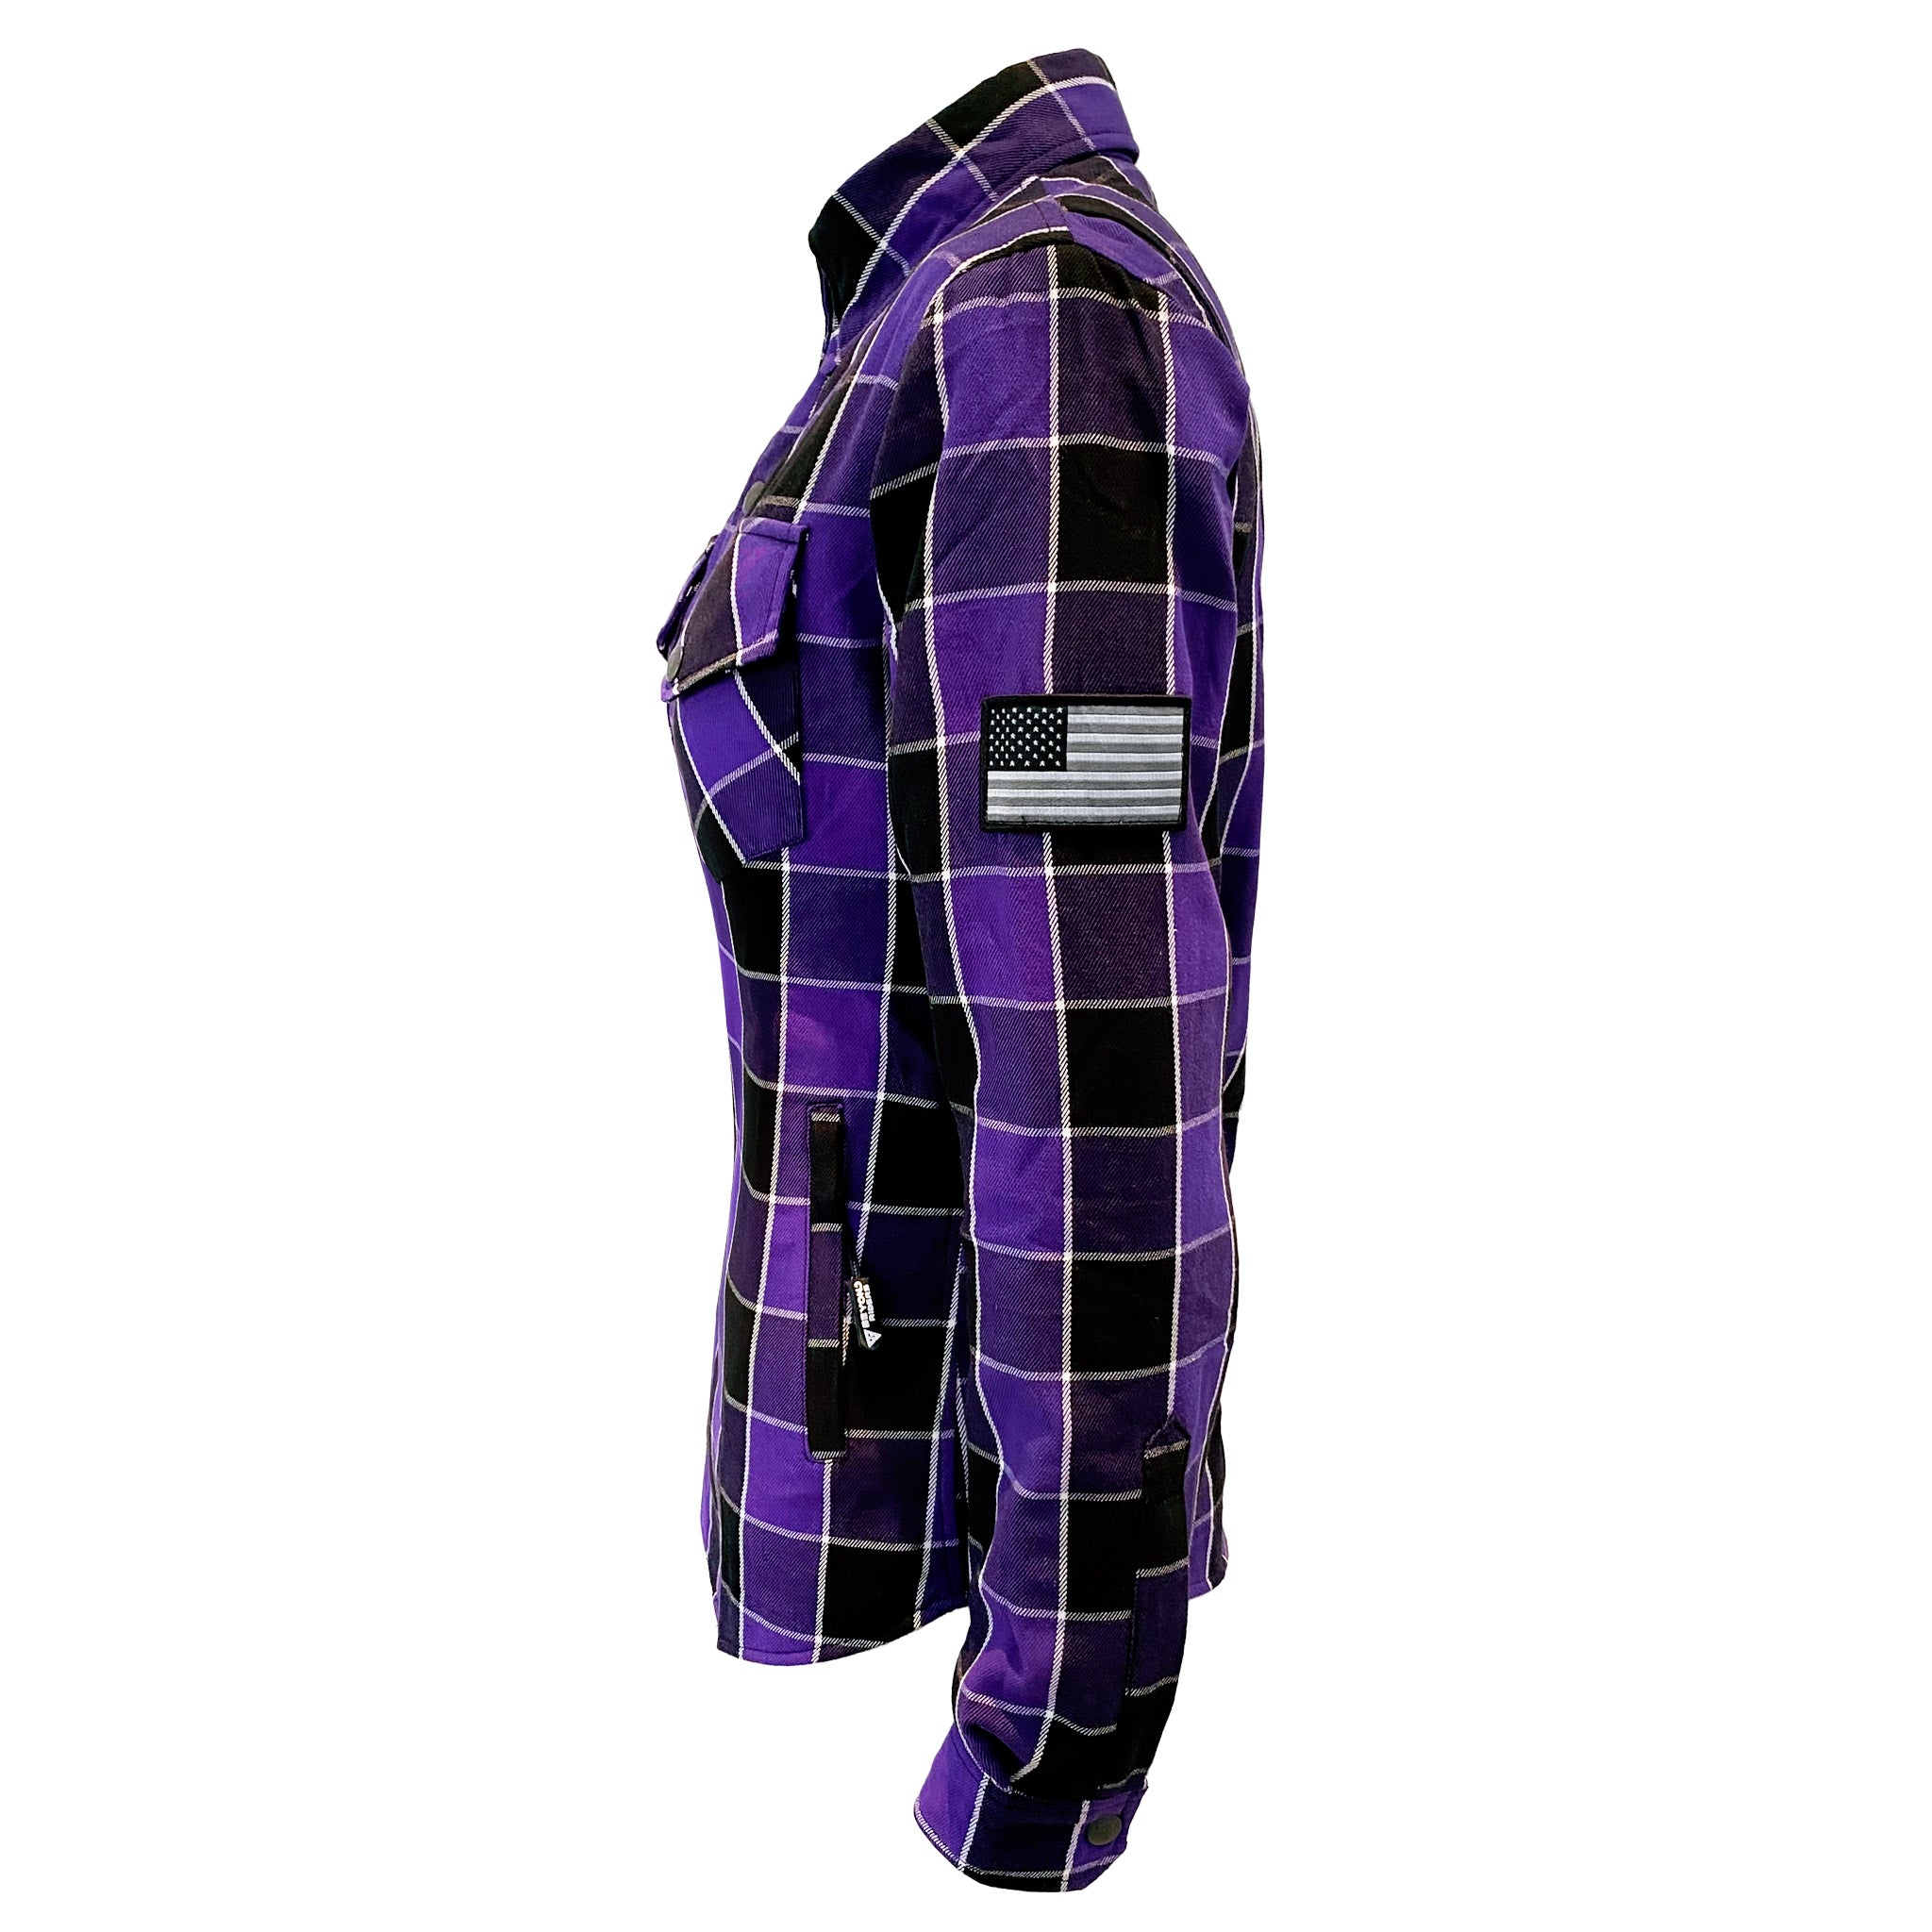 Women's-Flannel-Shirt-Purple-Black-Checkered-And-White-Strips-Left